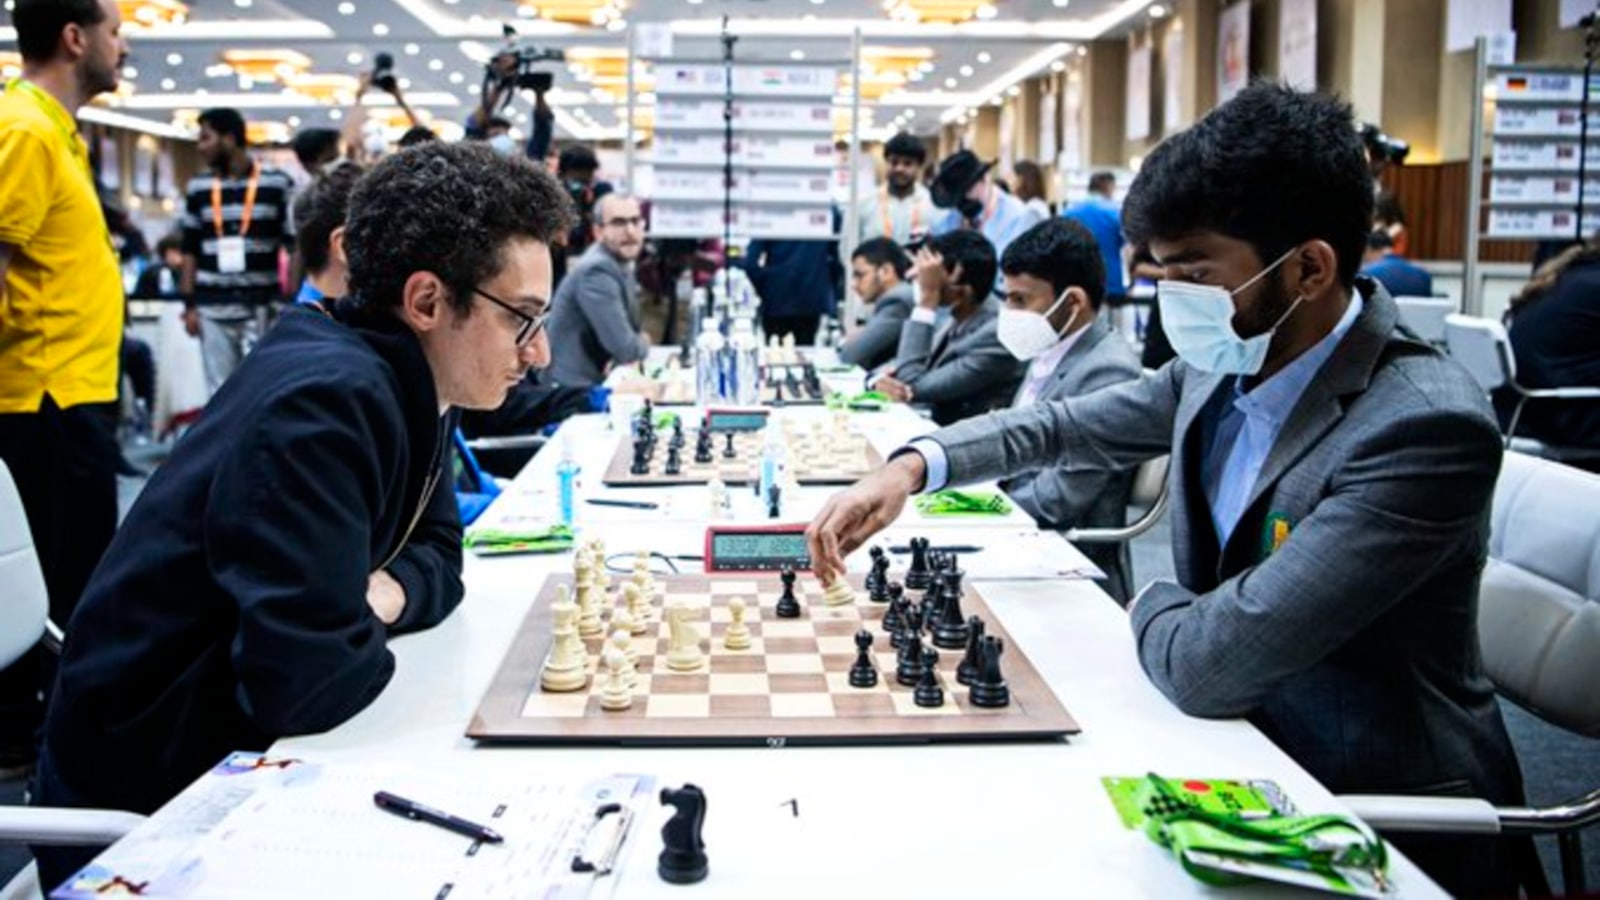 Gukesh dethrones Viswanathan Anand as India's top chess player